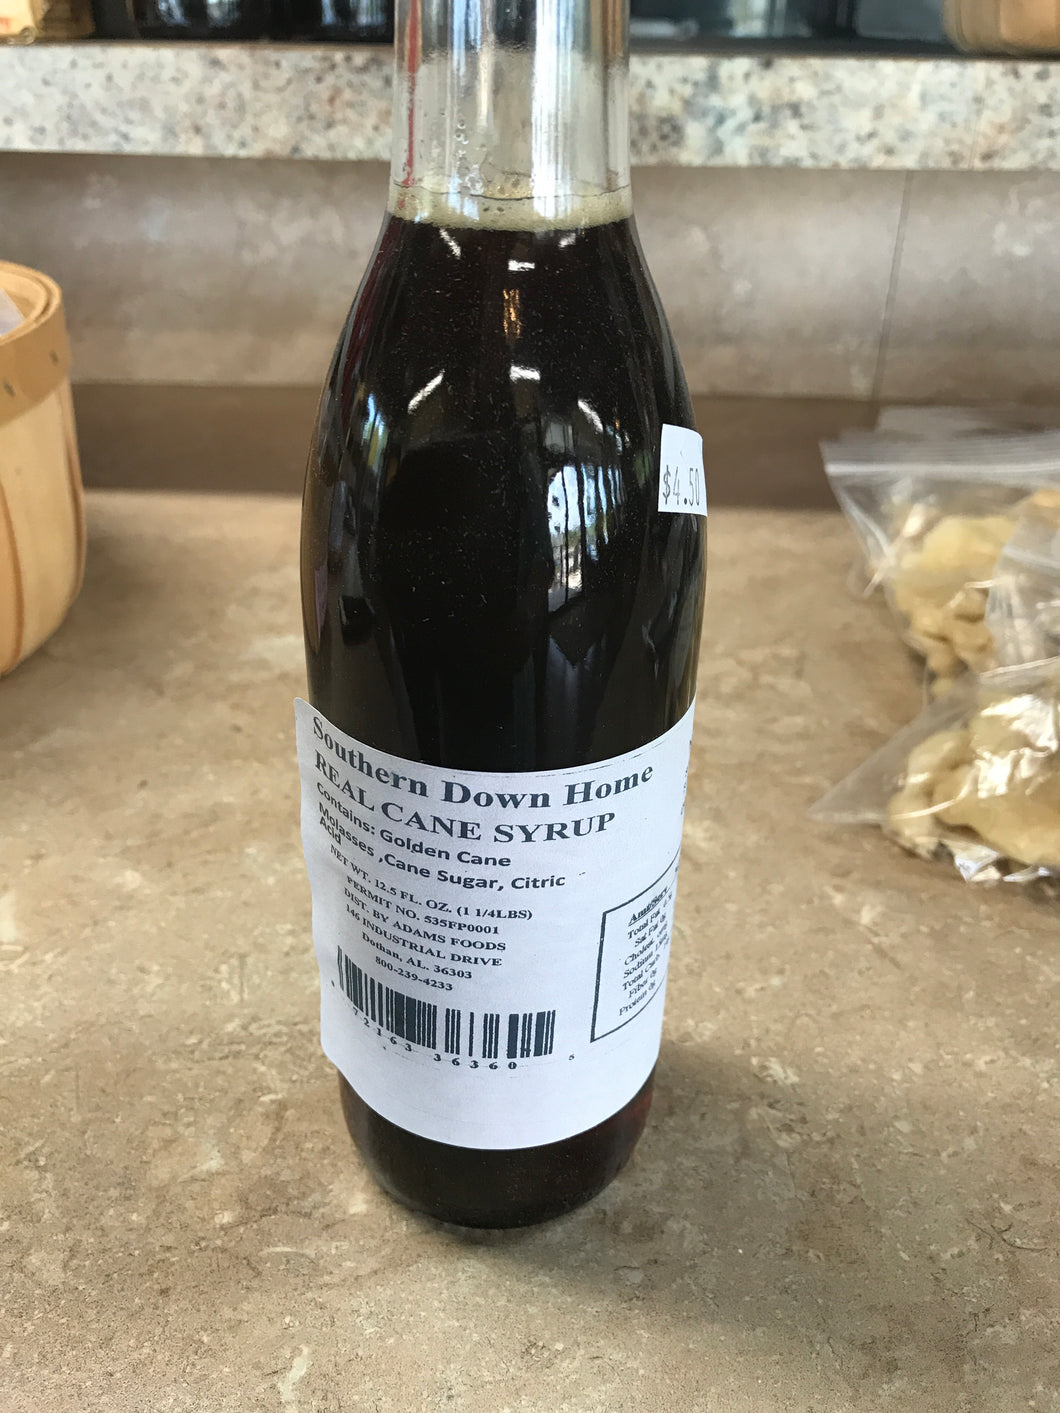 12 oz Southern Down Home Cane Syrup